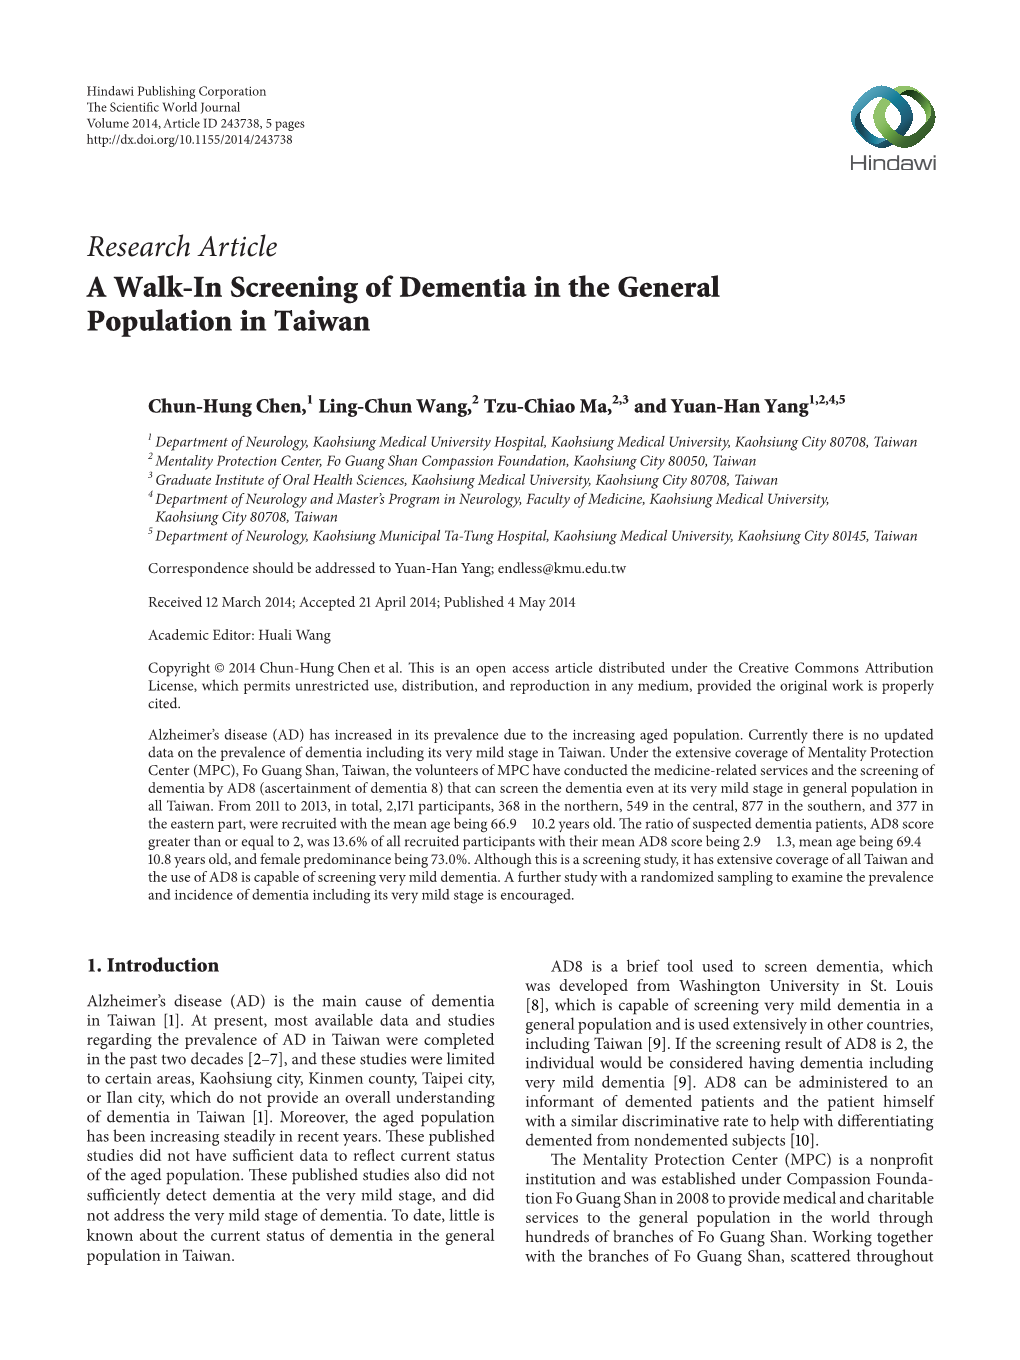 Research Article a Walk-In Screening of Dementia in the General Population in Taiwan